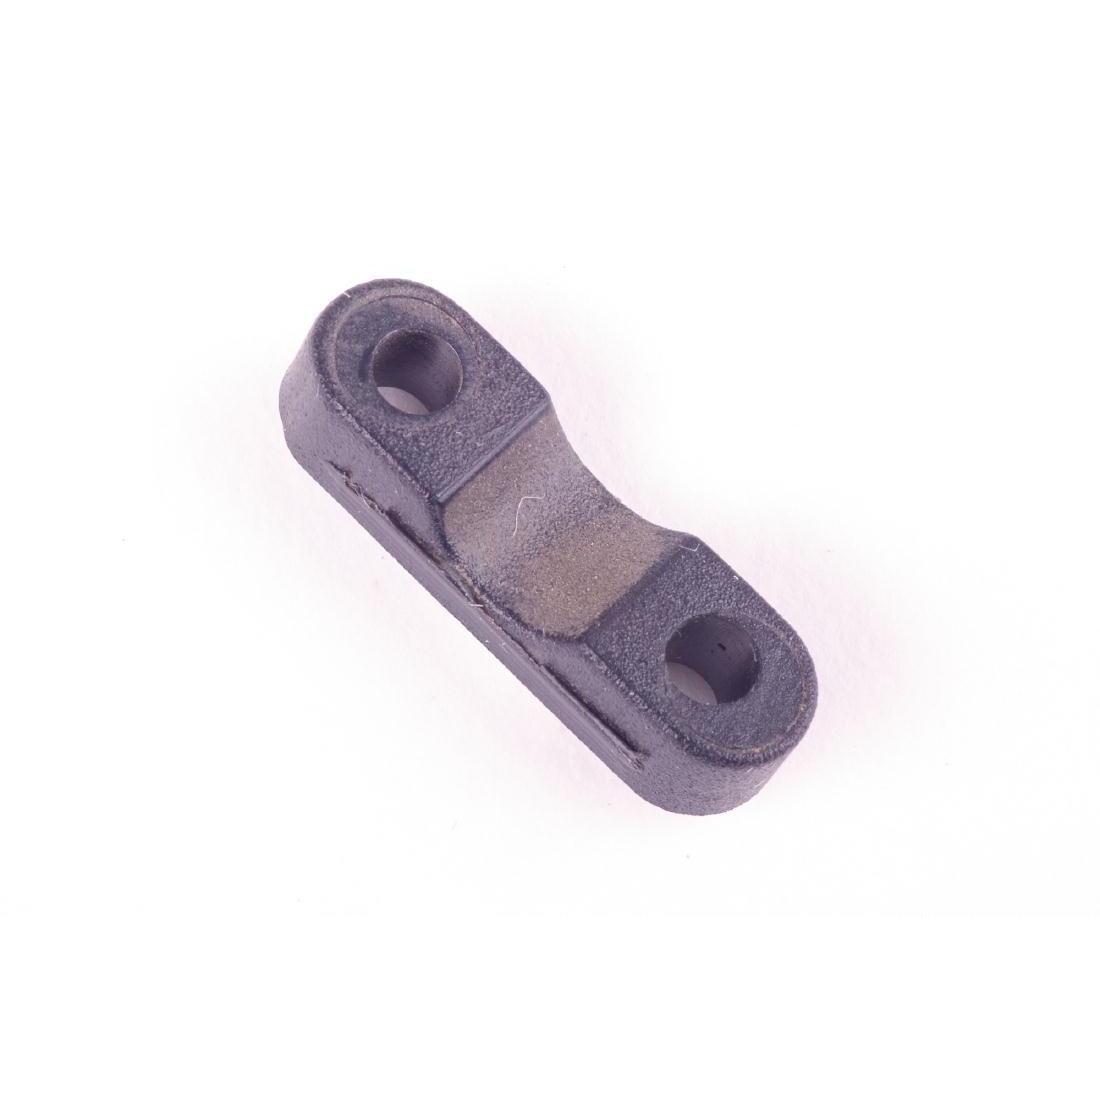 Connector - AB803 - 1